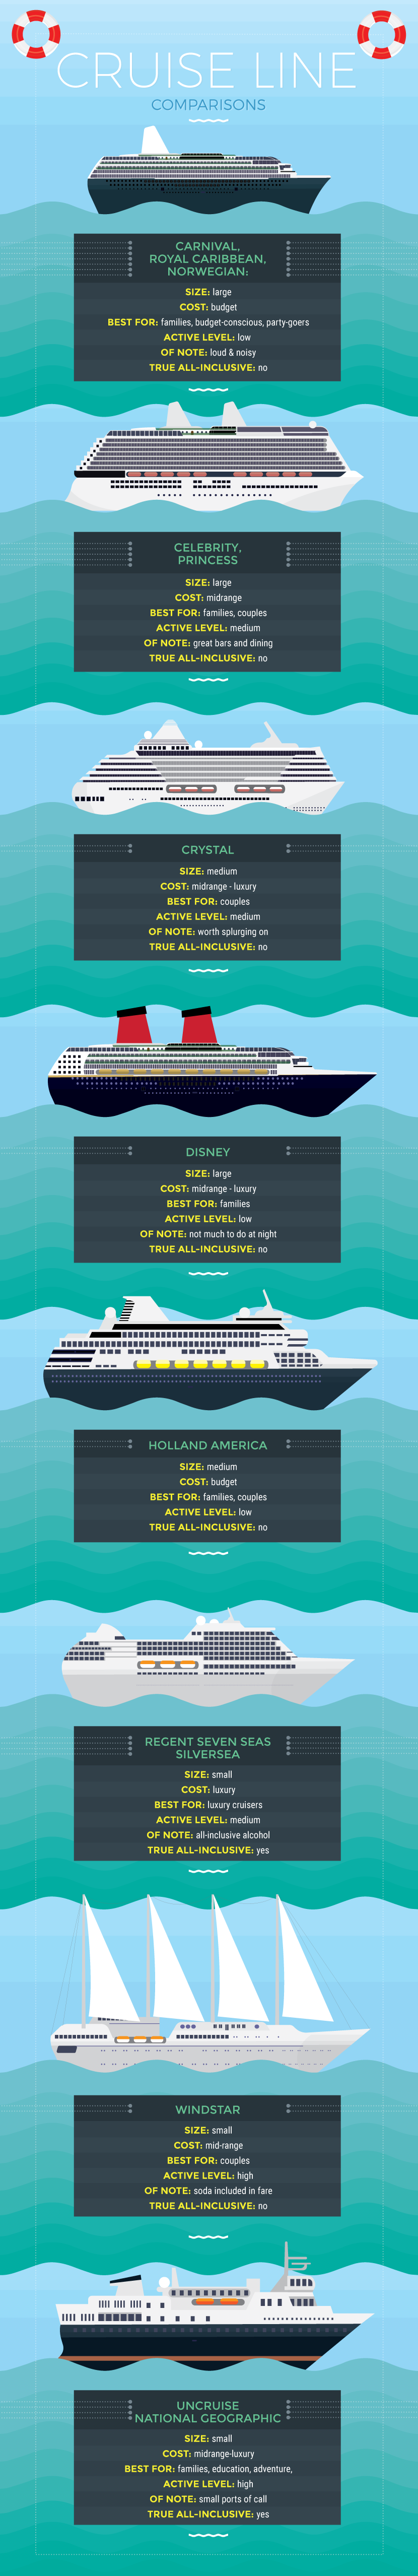 Cruise Line Comparisons - Cruise Tips from Planning to Port